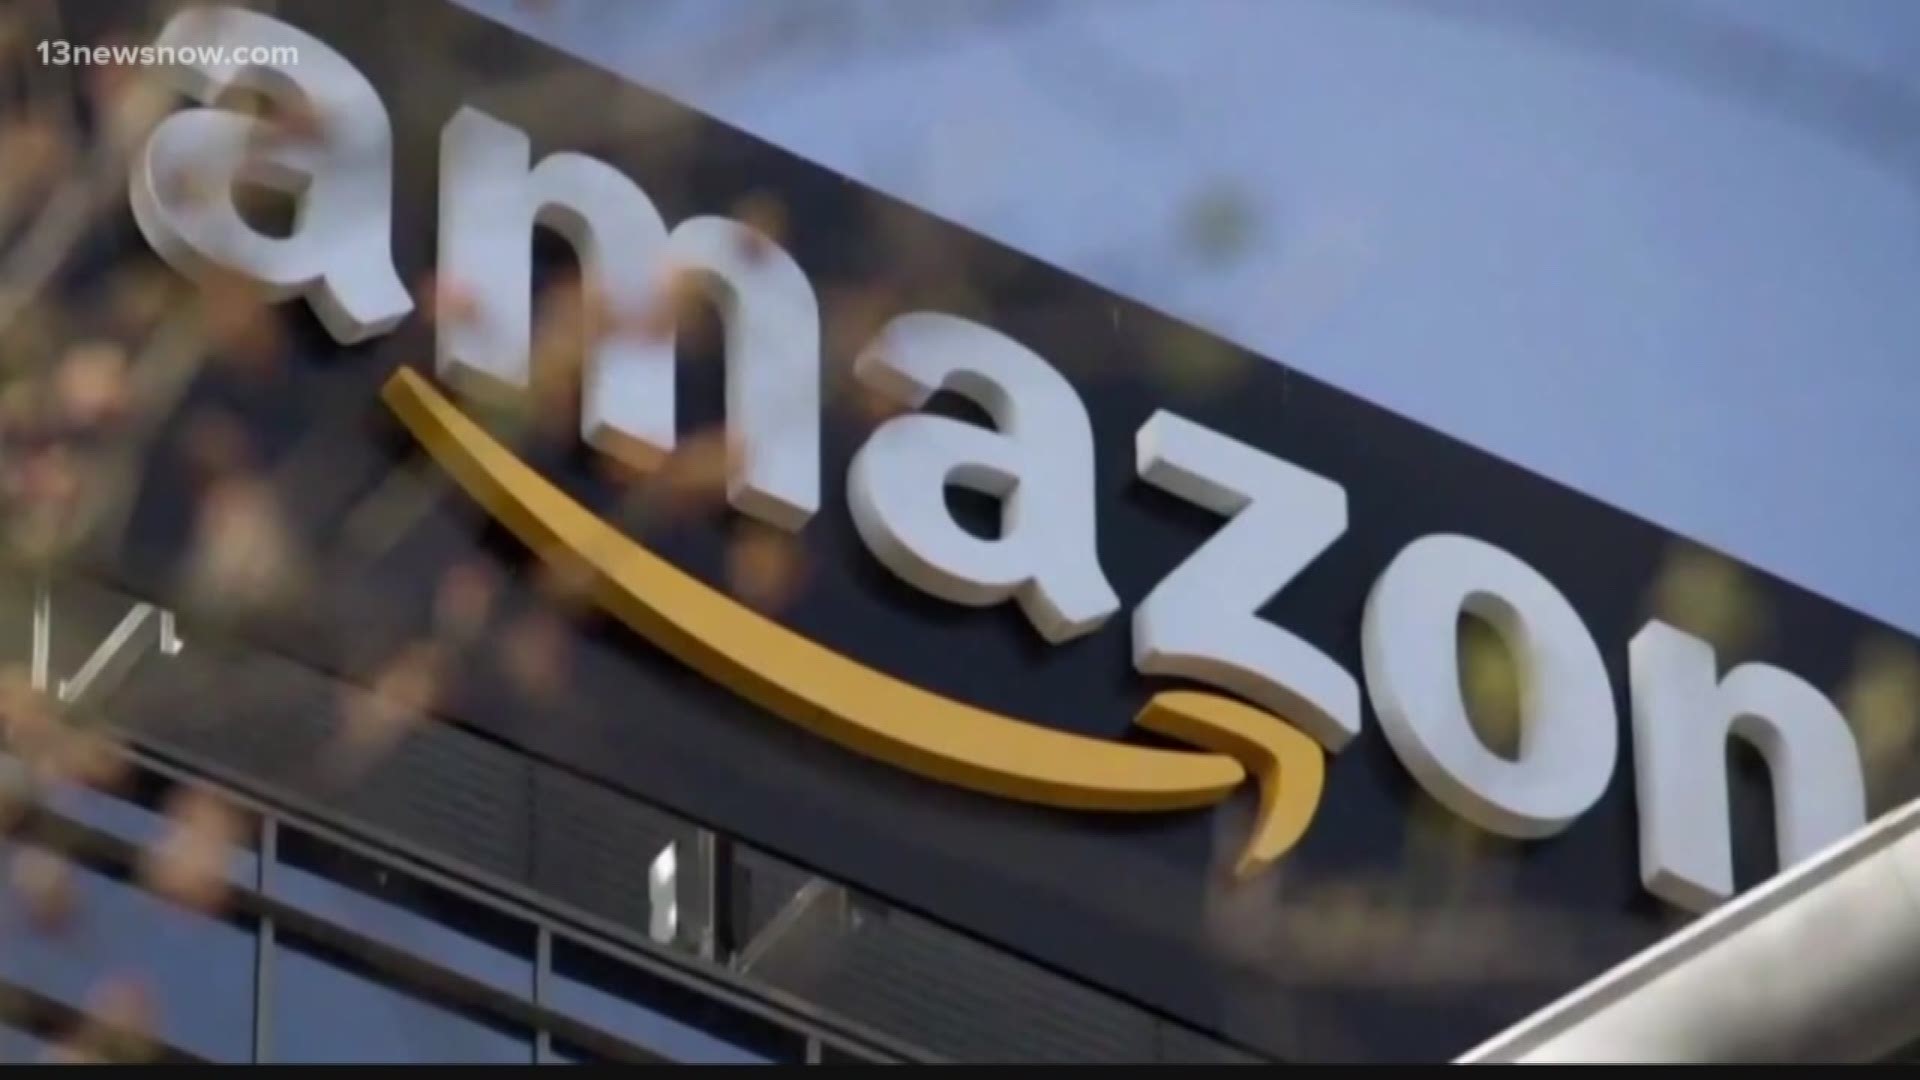 Virginia Governor Ralph Northam cheered Amazon's choice of Arlington as one of two new headquarter locations for the online retail giant.